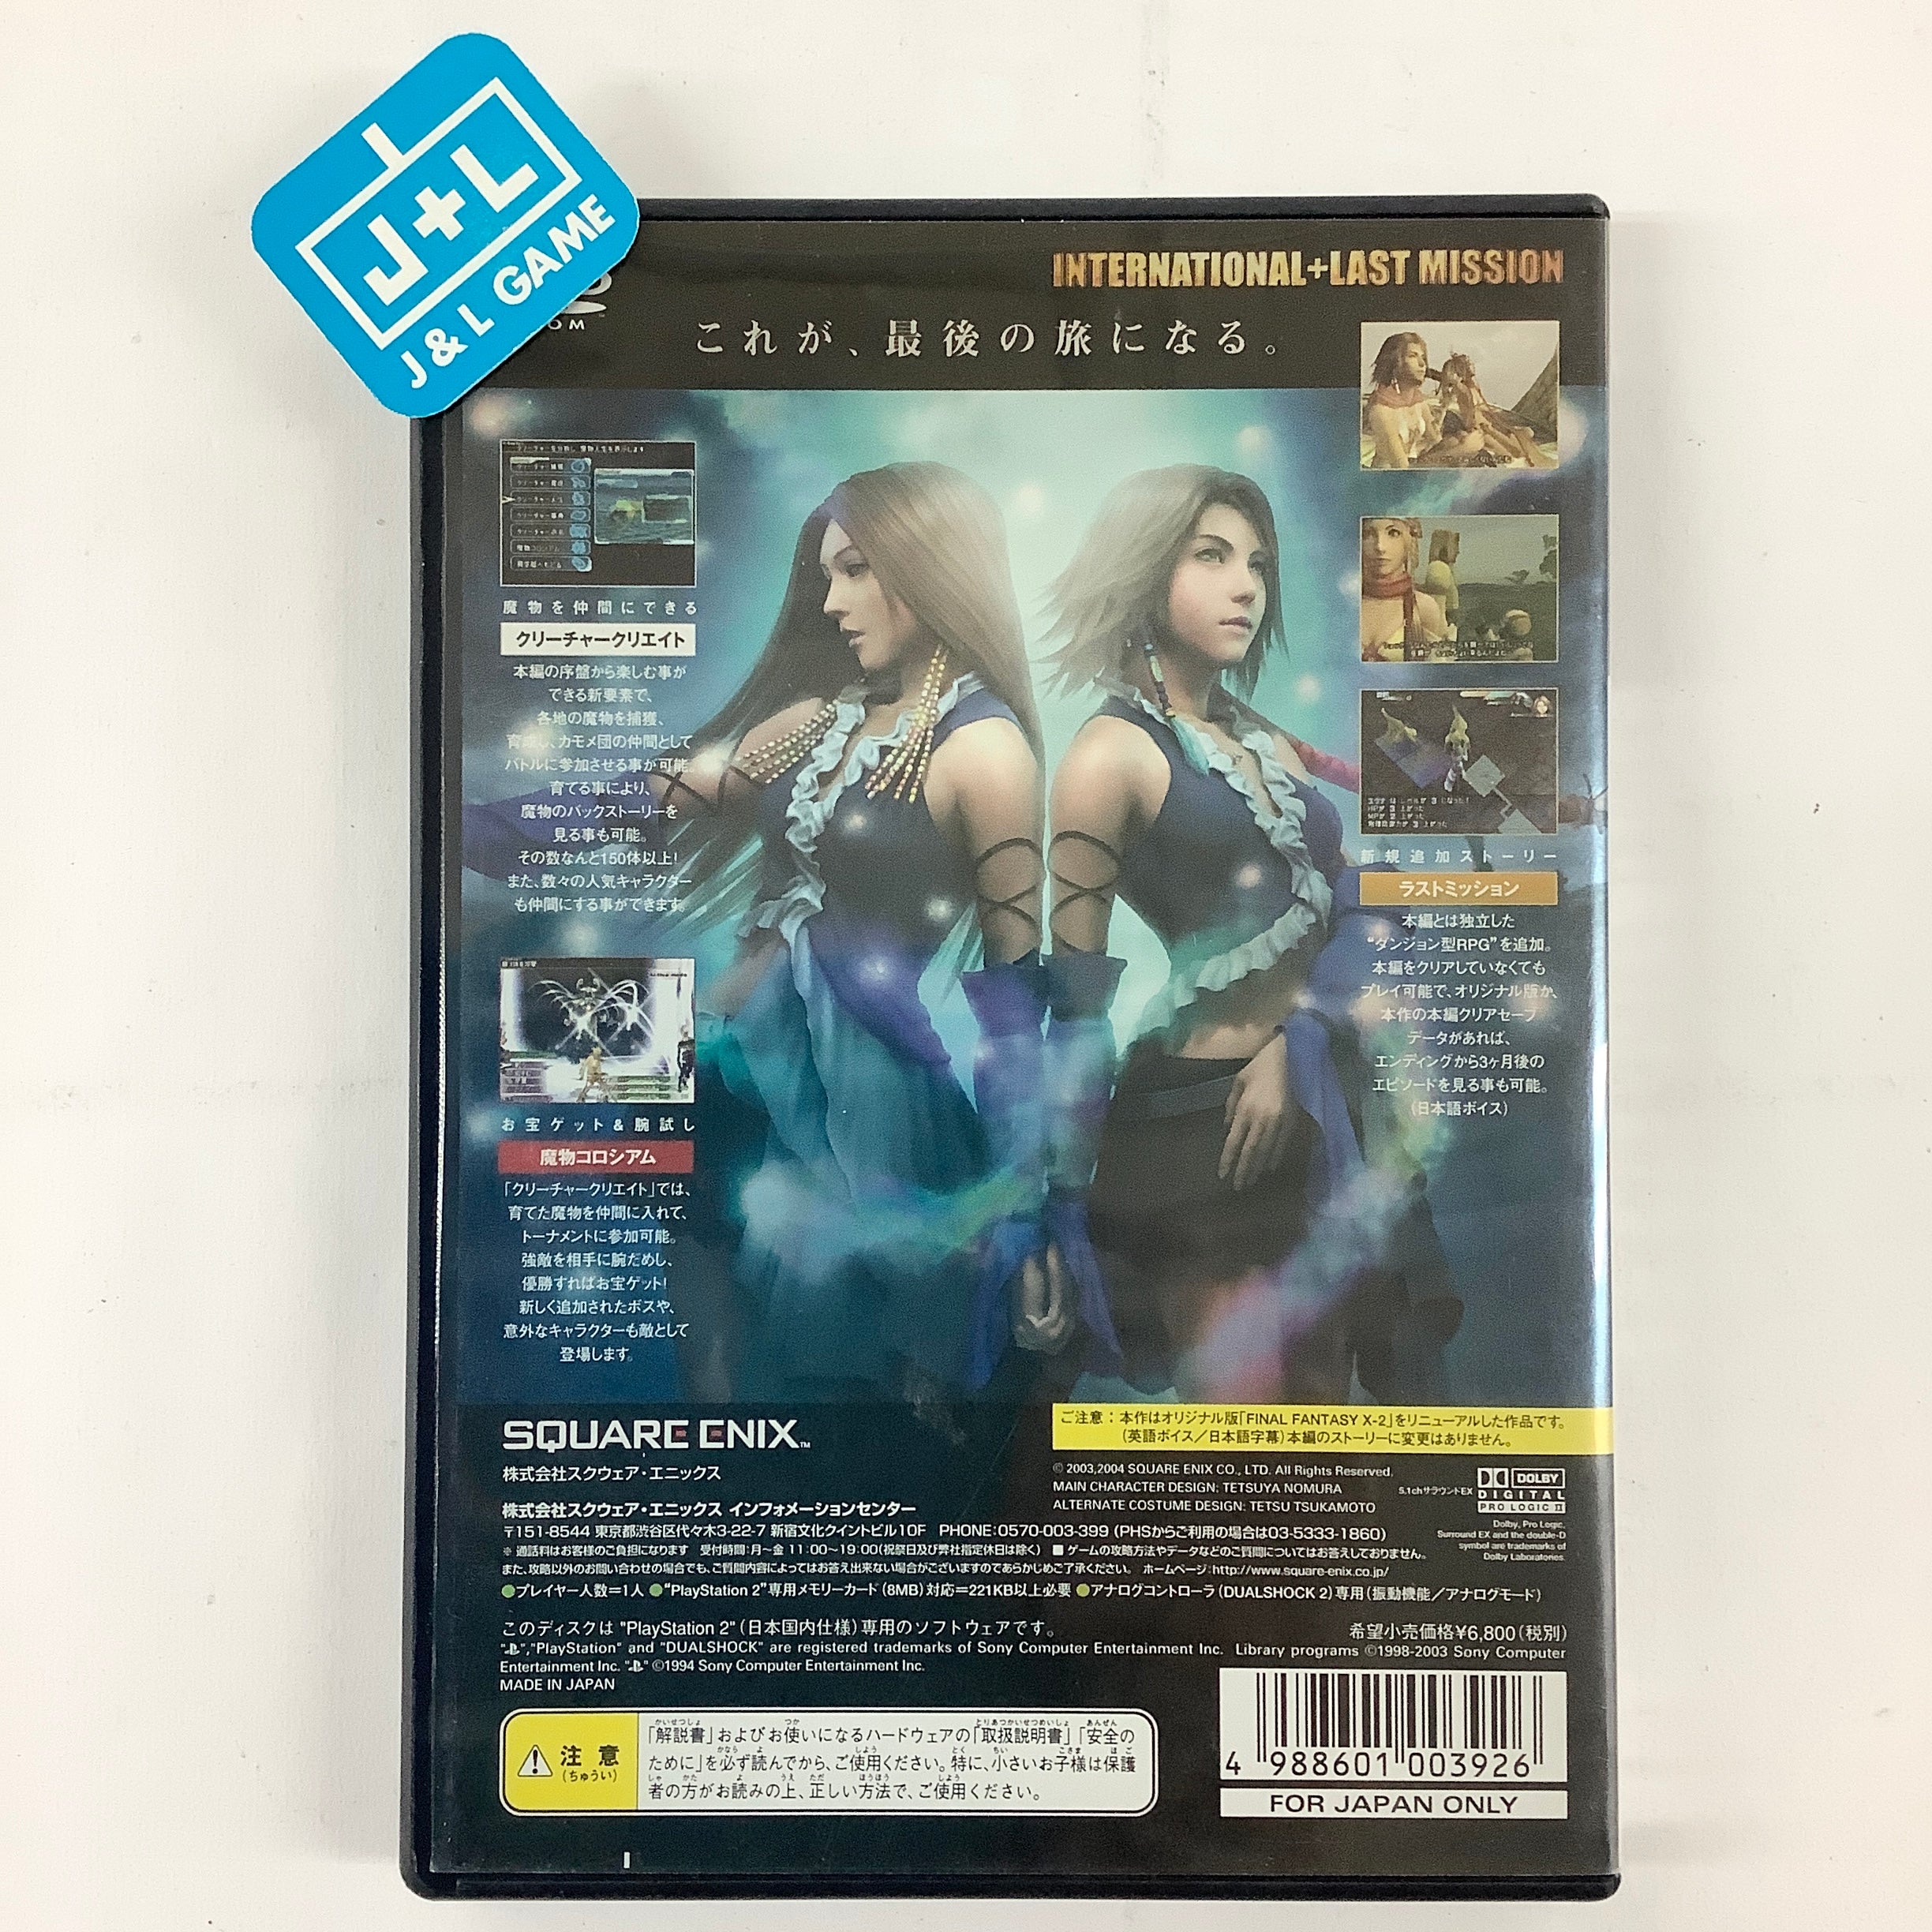 Final Fantasy X-2: International + Last Mission - (PS2) PlayStation 2  [Pre-Owned] (Japanese Import)